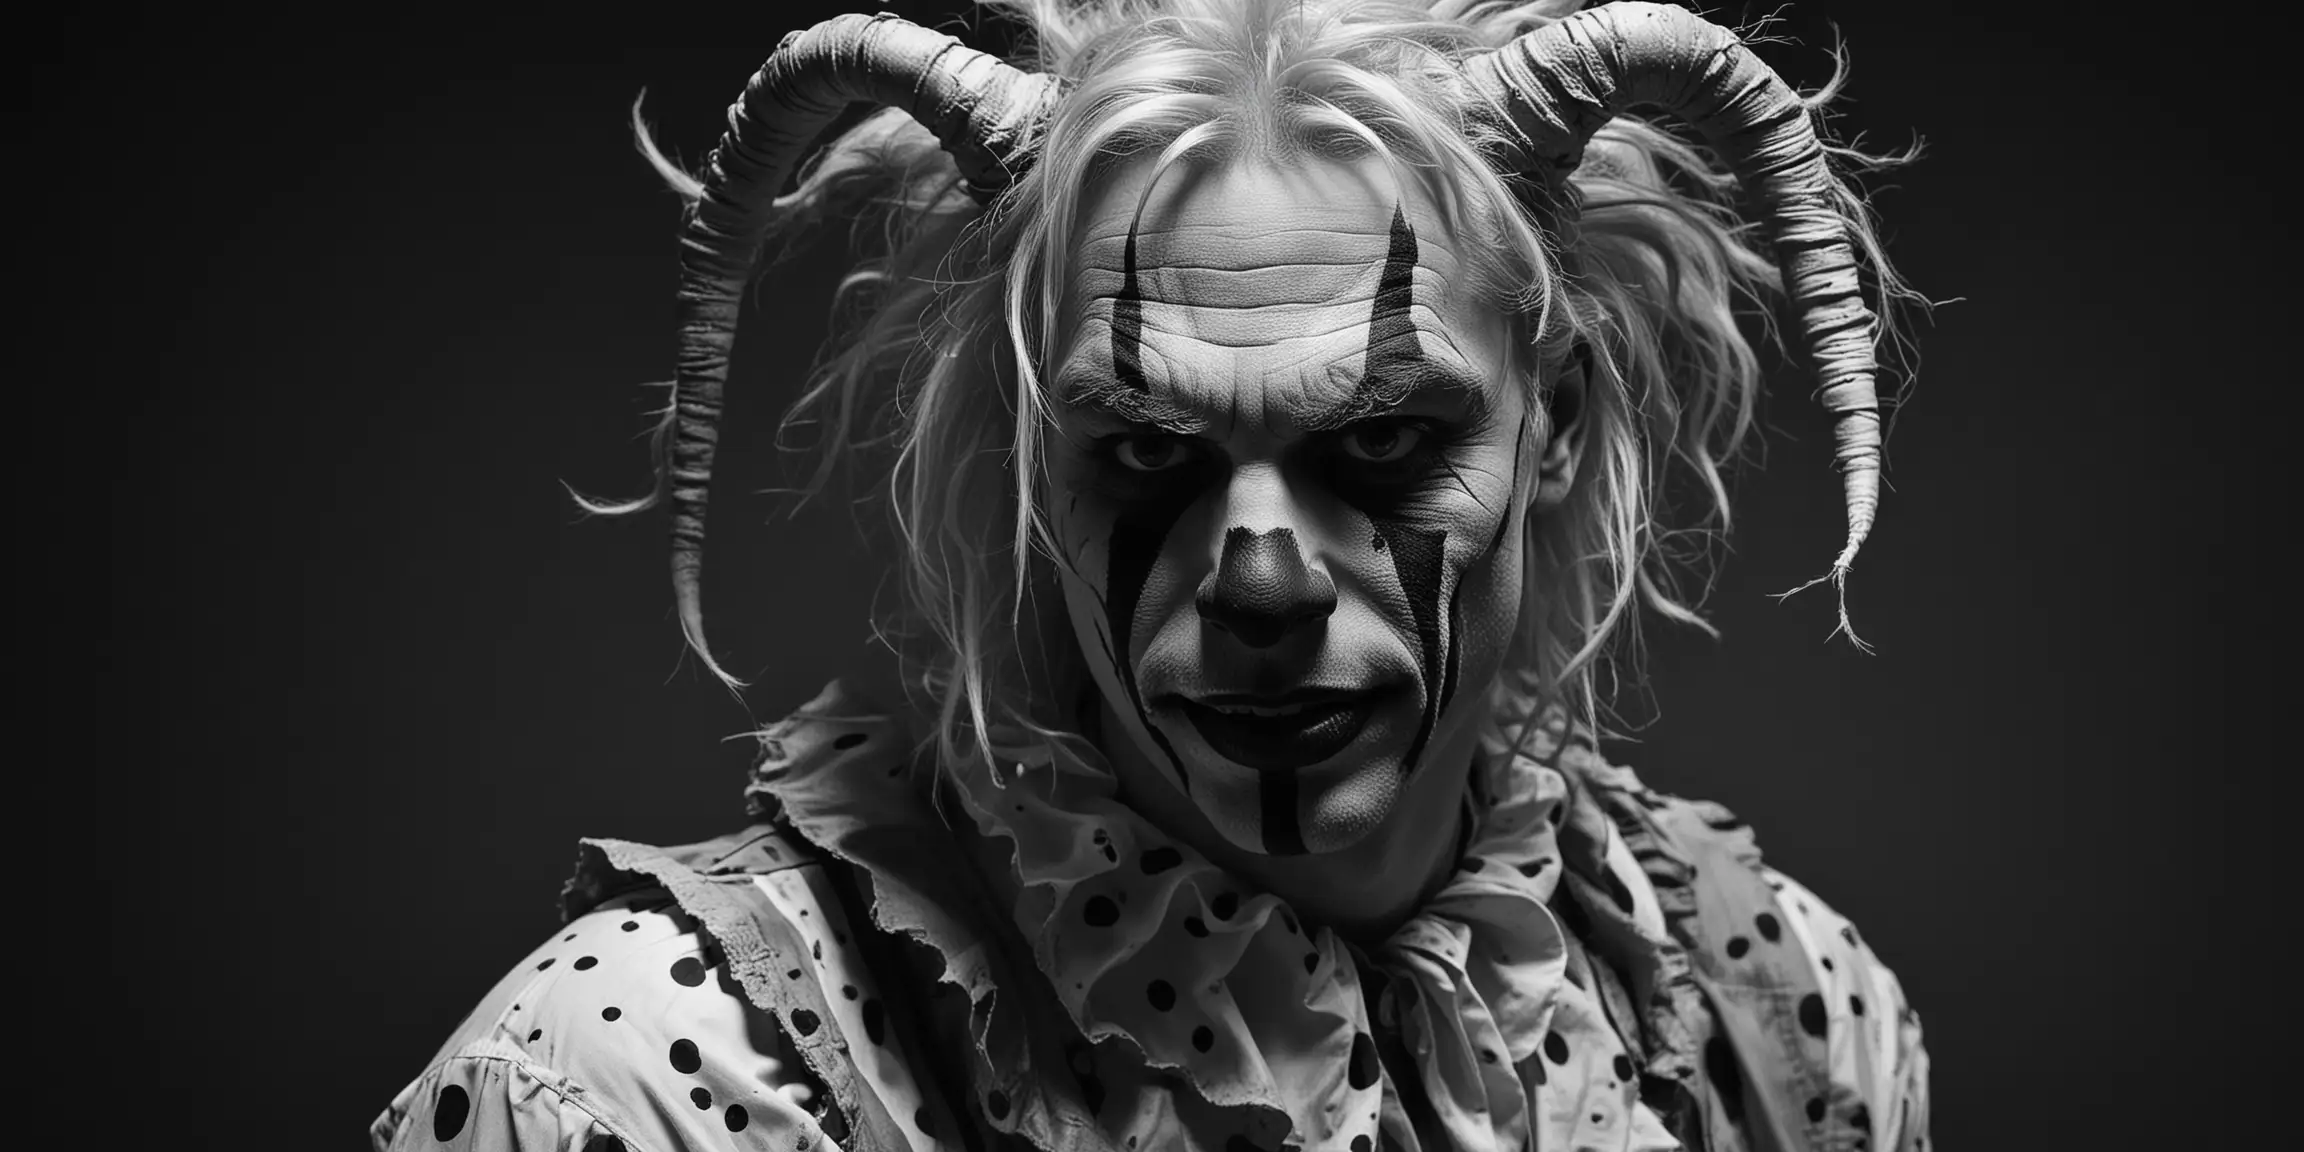 Surreal Clown Model in Distress Powerful Sadness and Creepy Laughter